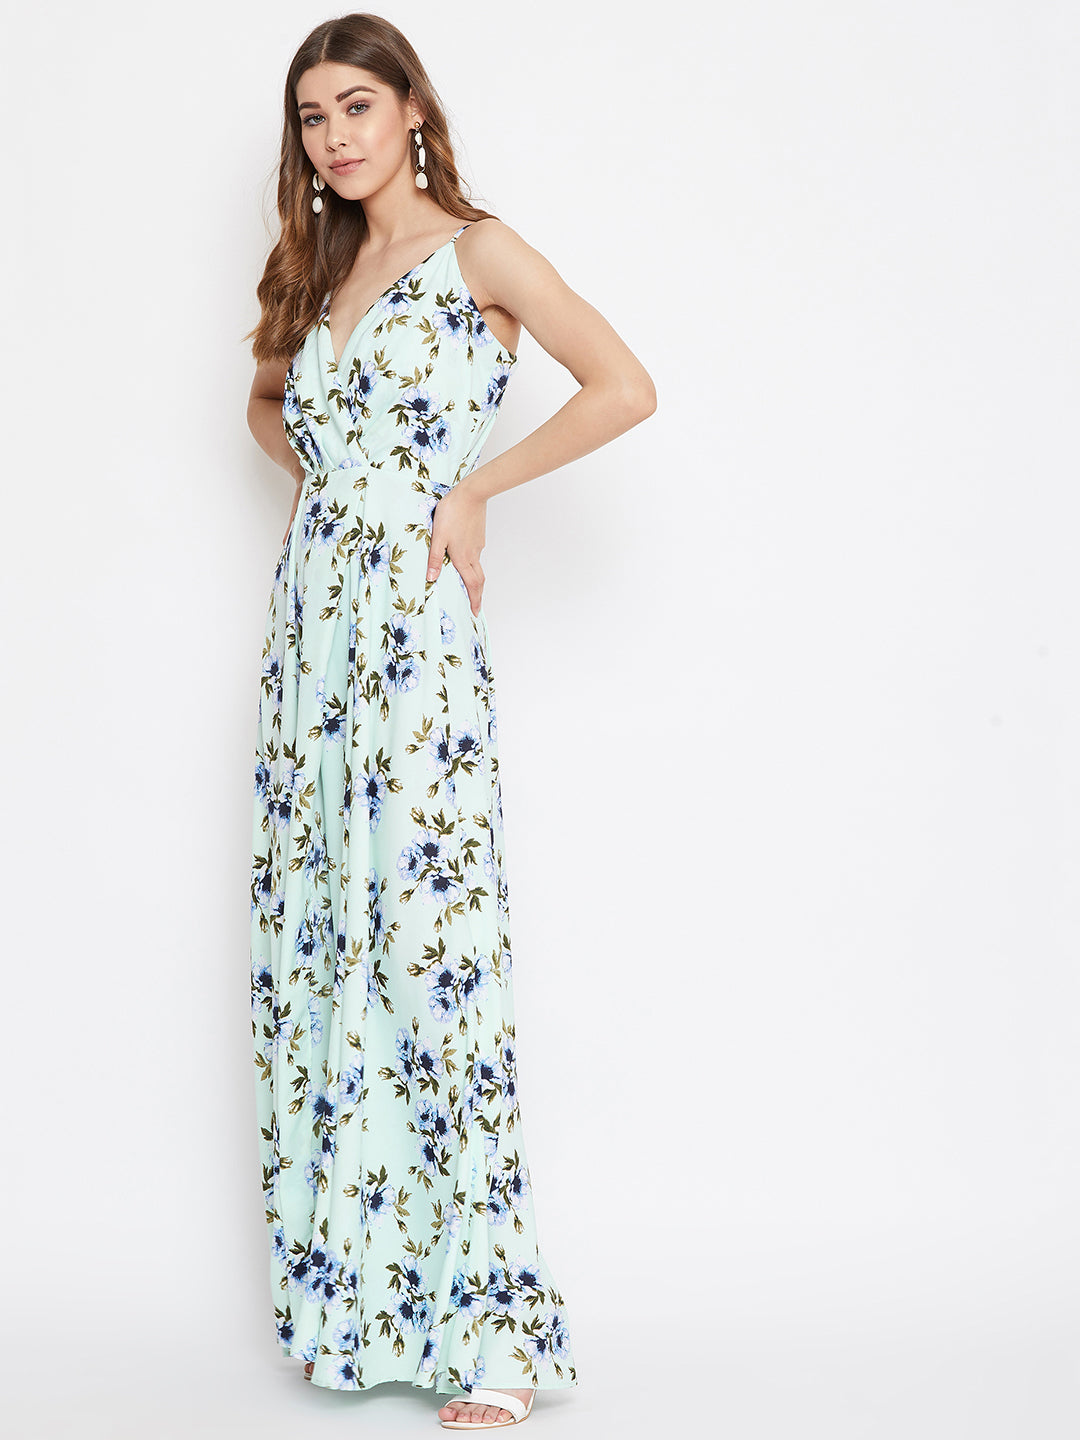 Berrylush Women Green & Turquoise Blue Floral Printed V-Neck Thigh-High Slit Fit & Flare Maxi Dress